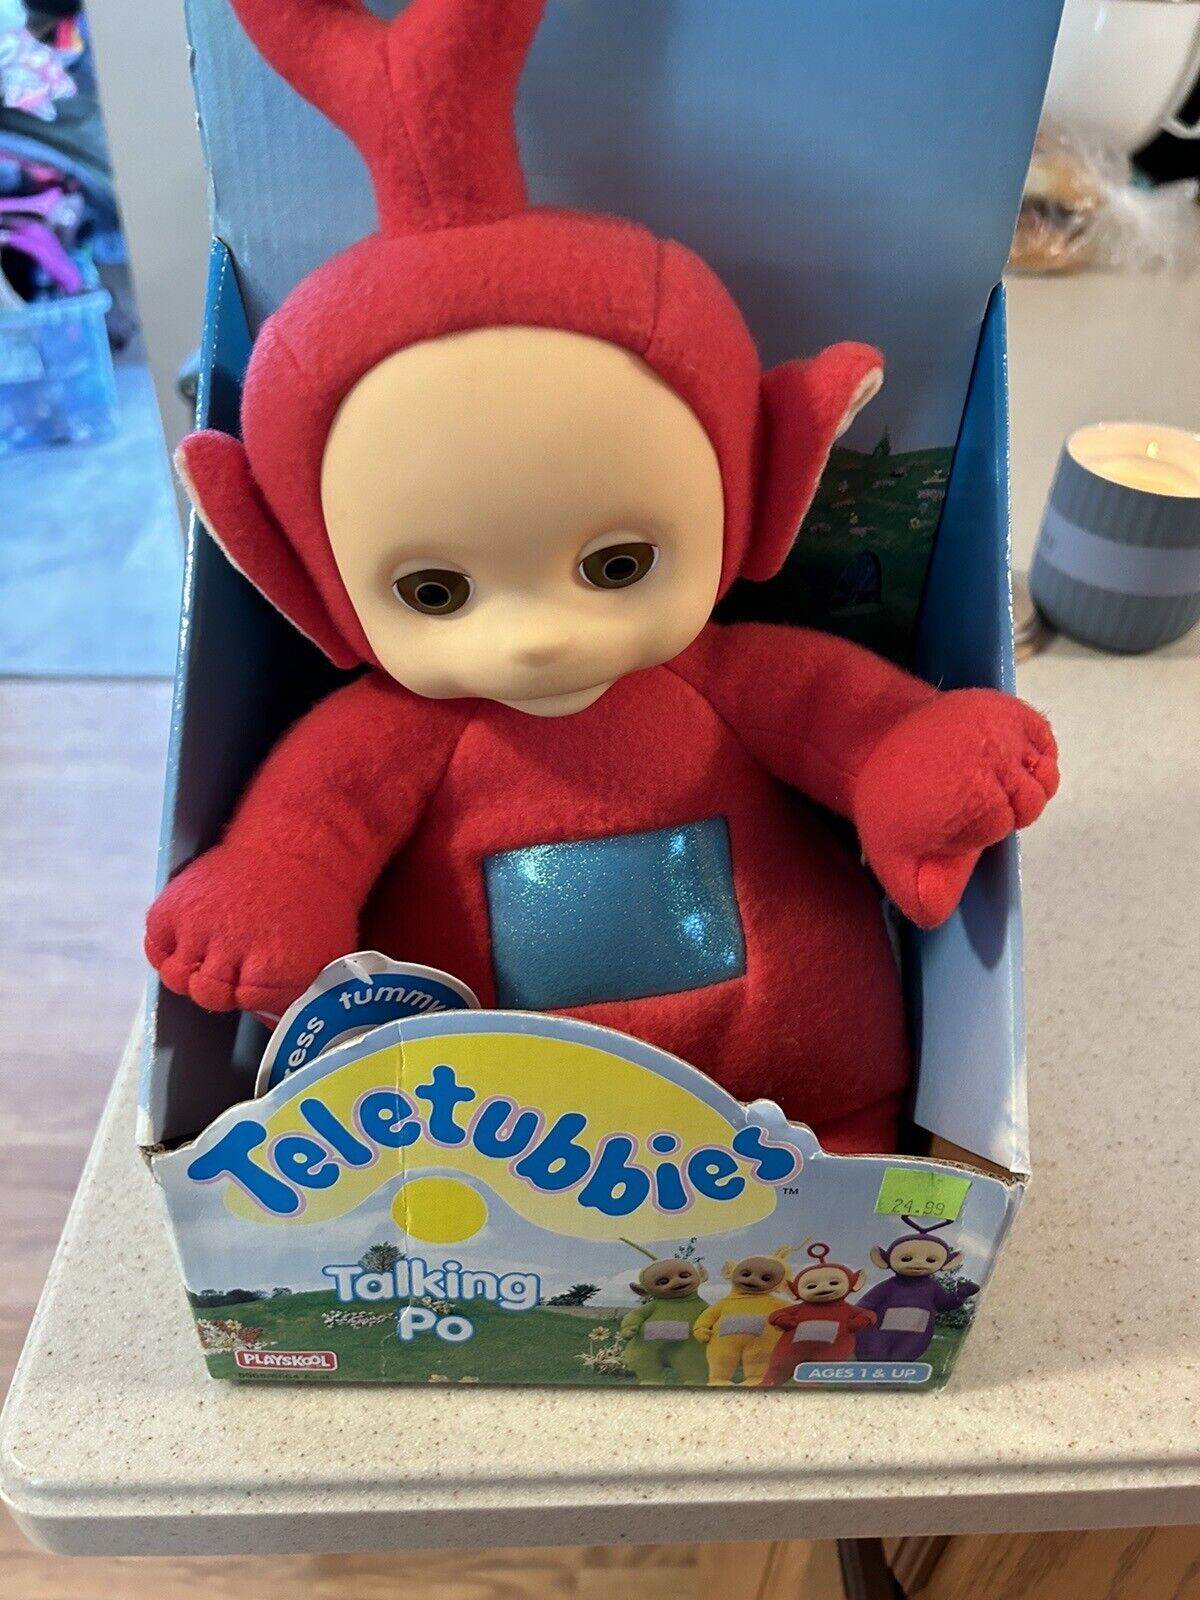 1998 Playskool Red Teletubbies TALKING PO Discontinued says**Bad Words** New Box